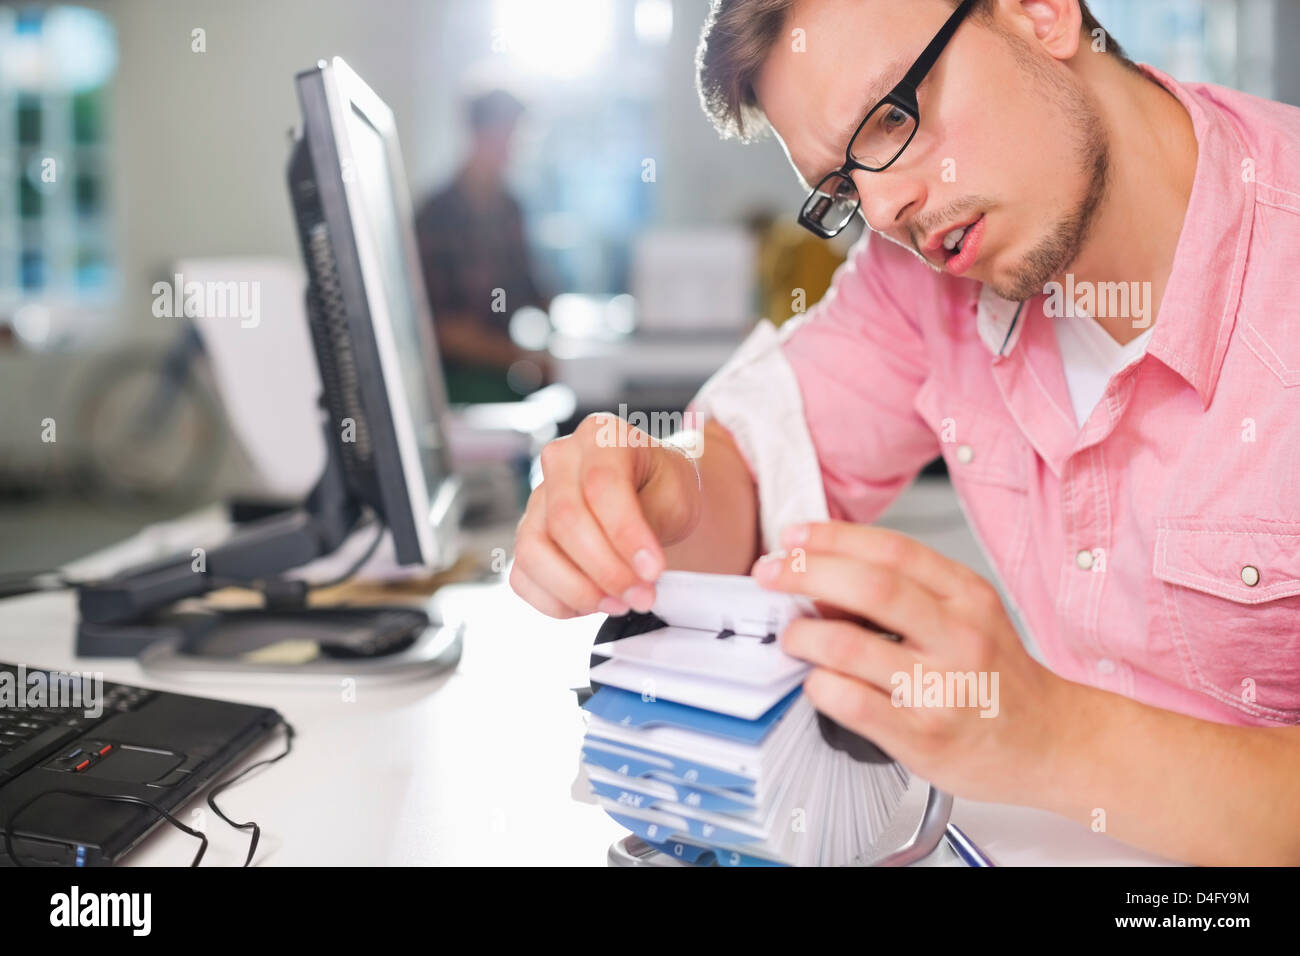 Businessman searching for address on desk Stock Photo